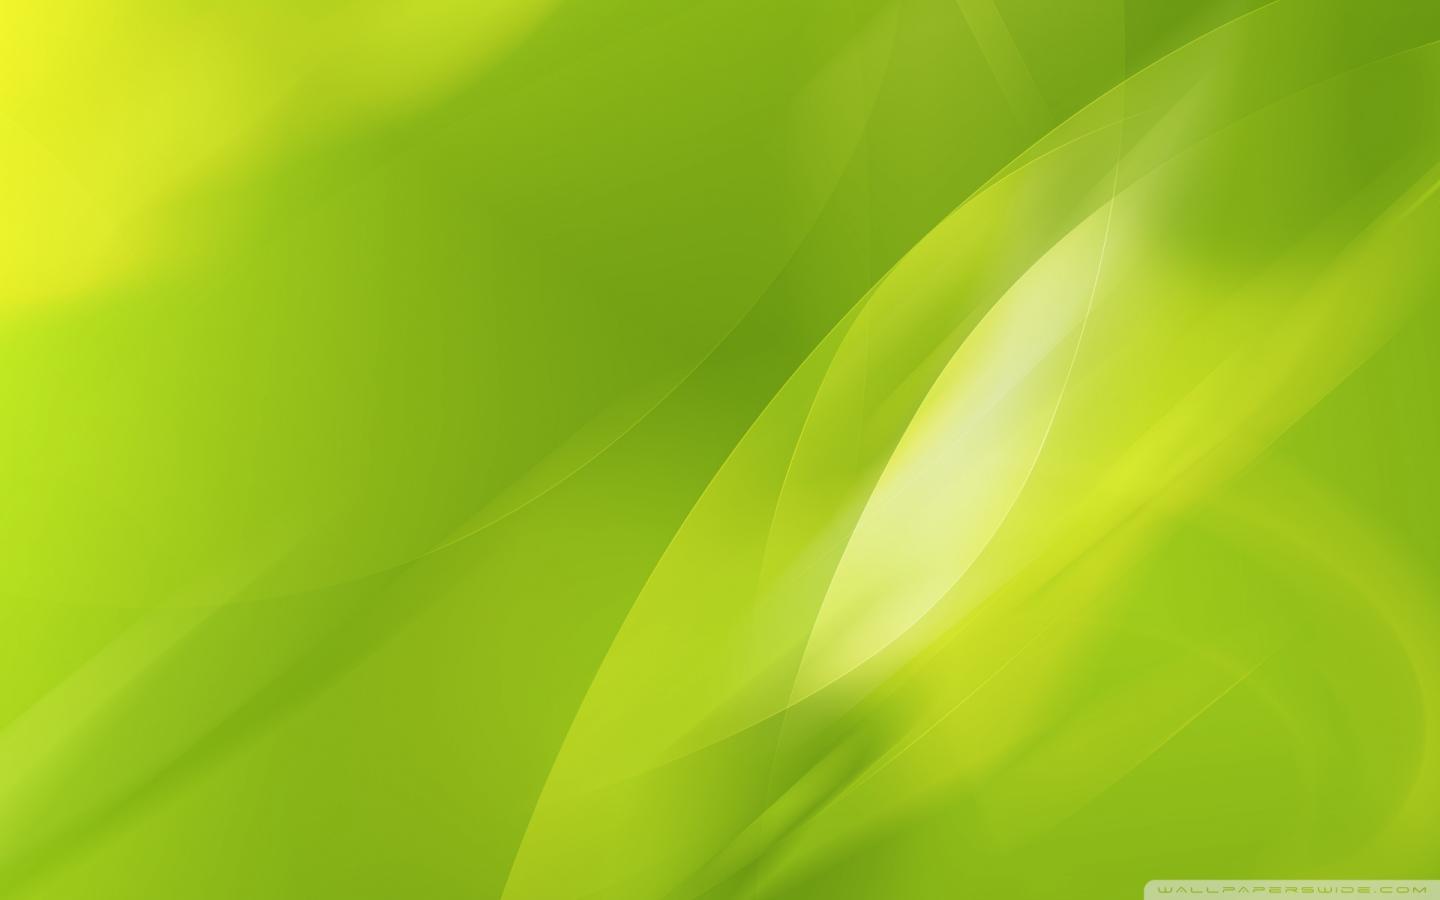 Green Texture Photos Download The BEST Free Green Texture Stock Photos  HD  Images